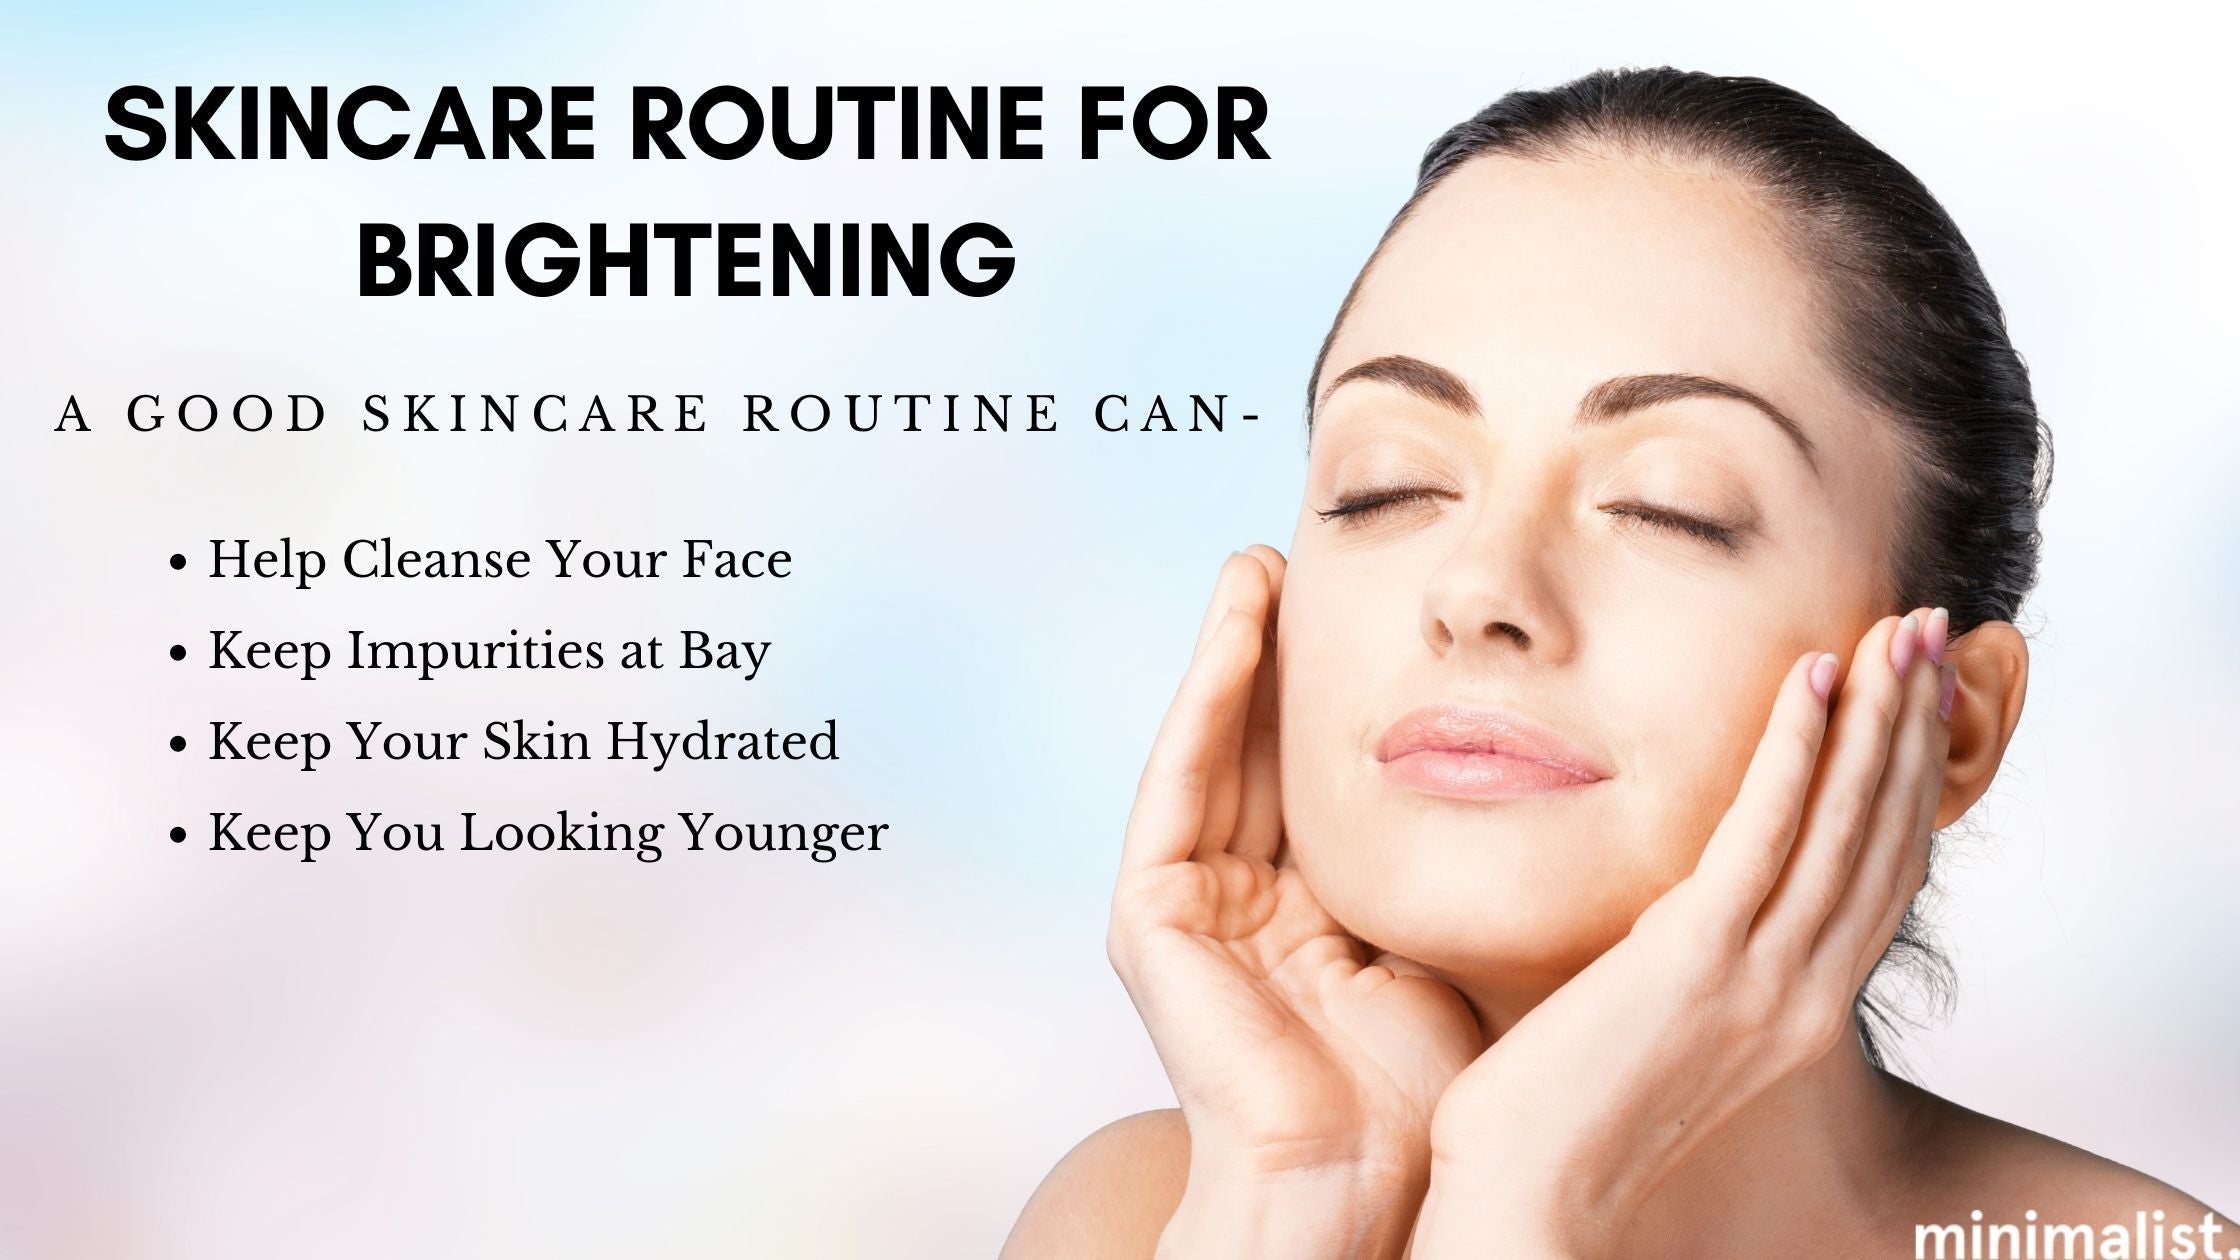 You need an effective skincare routine